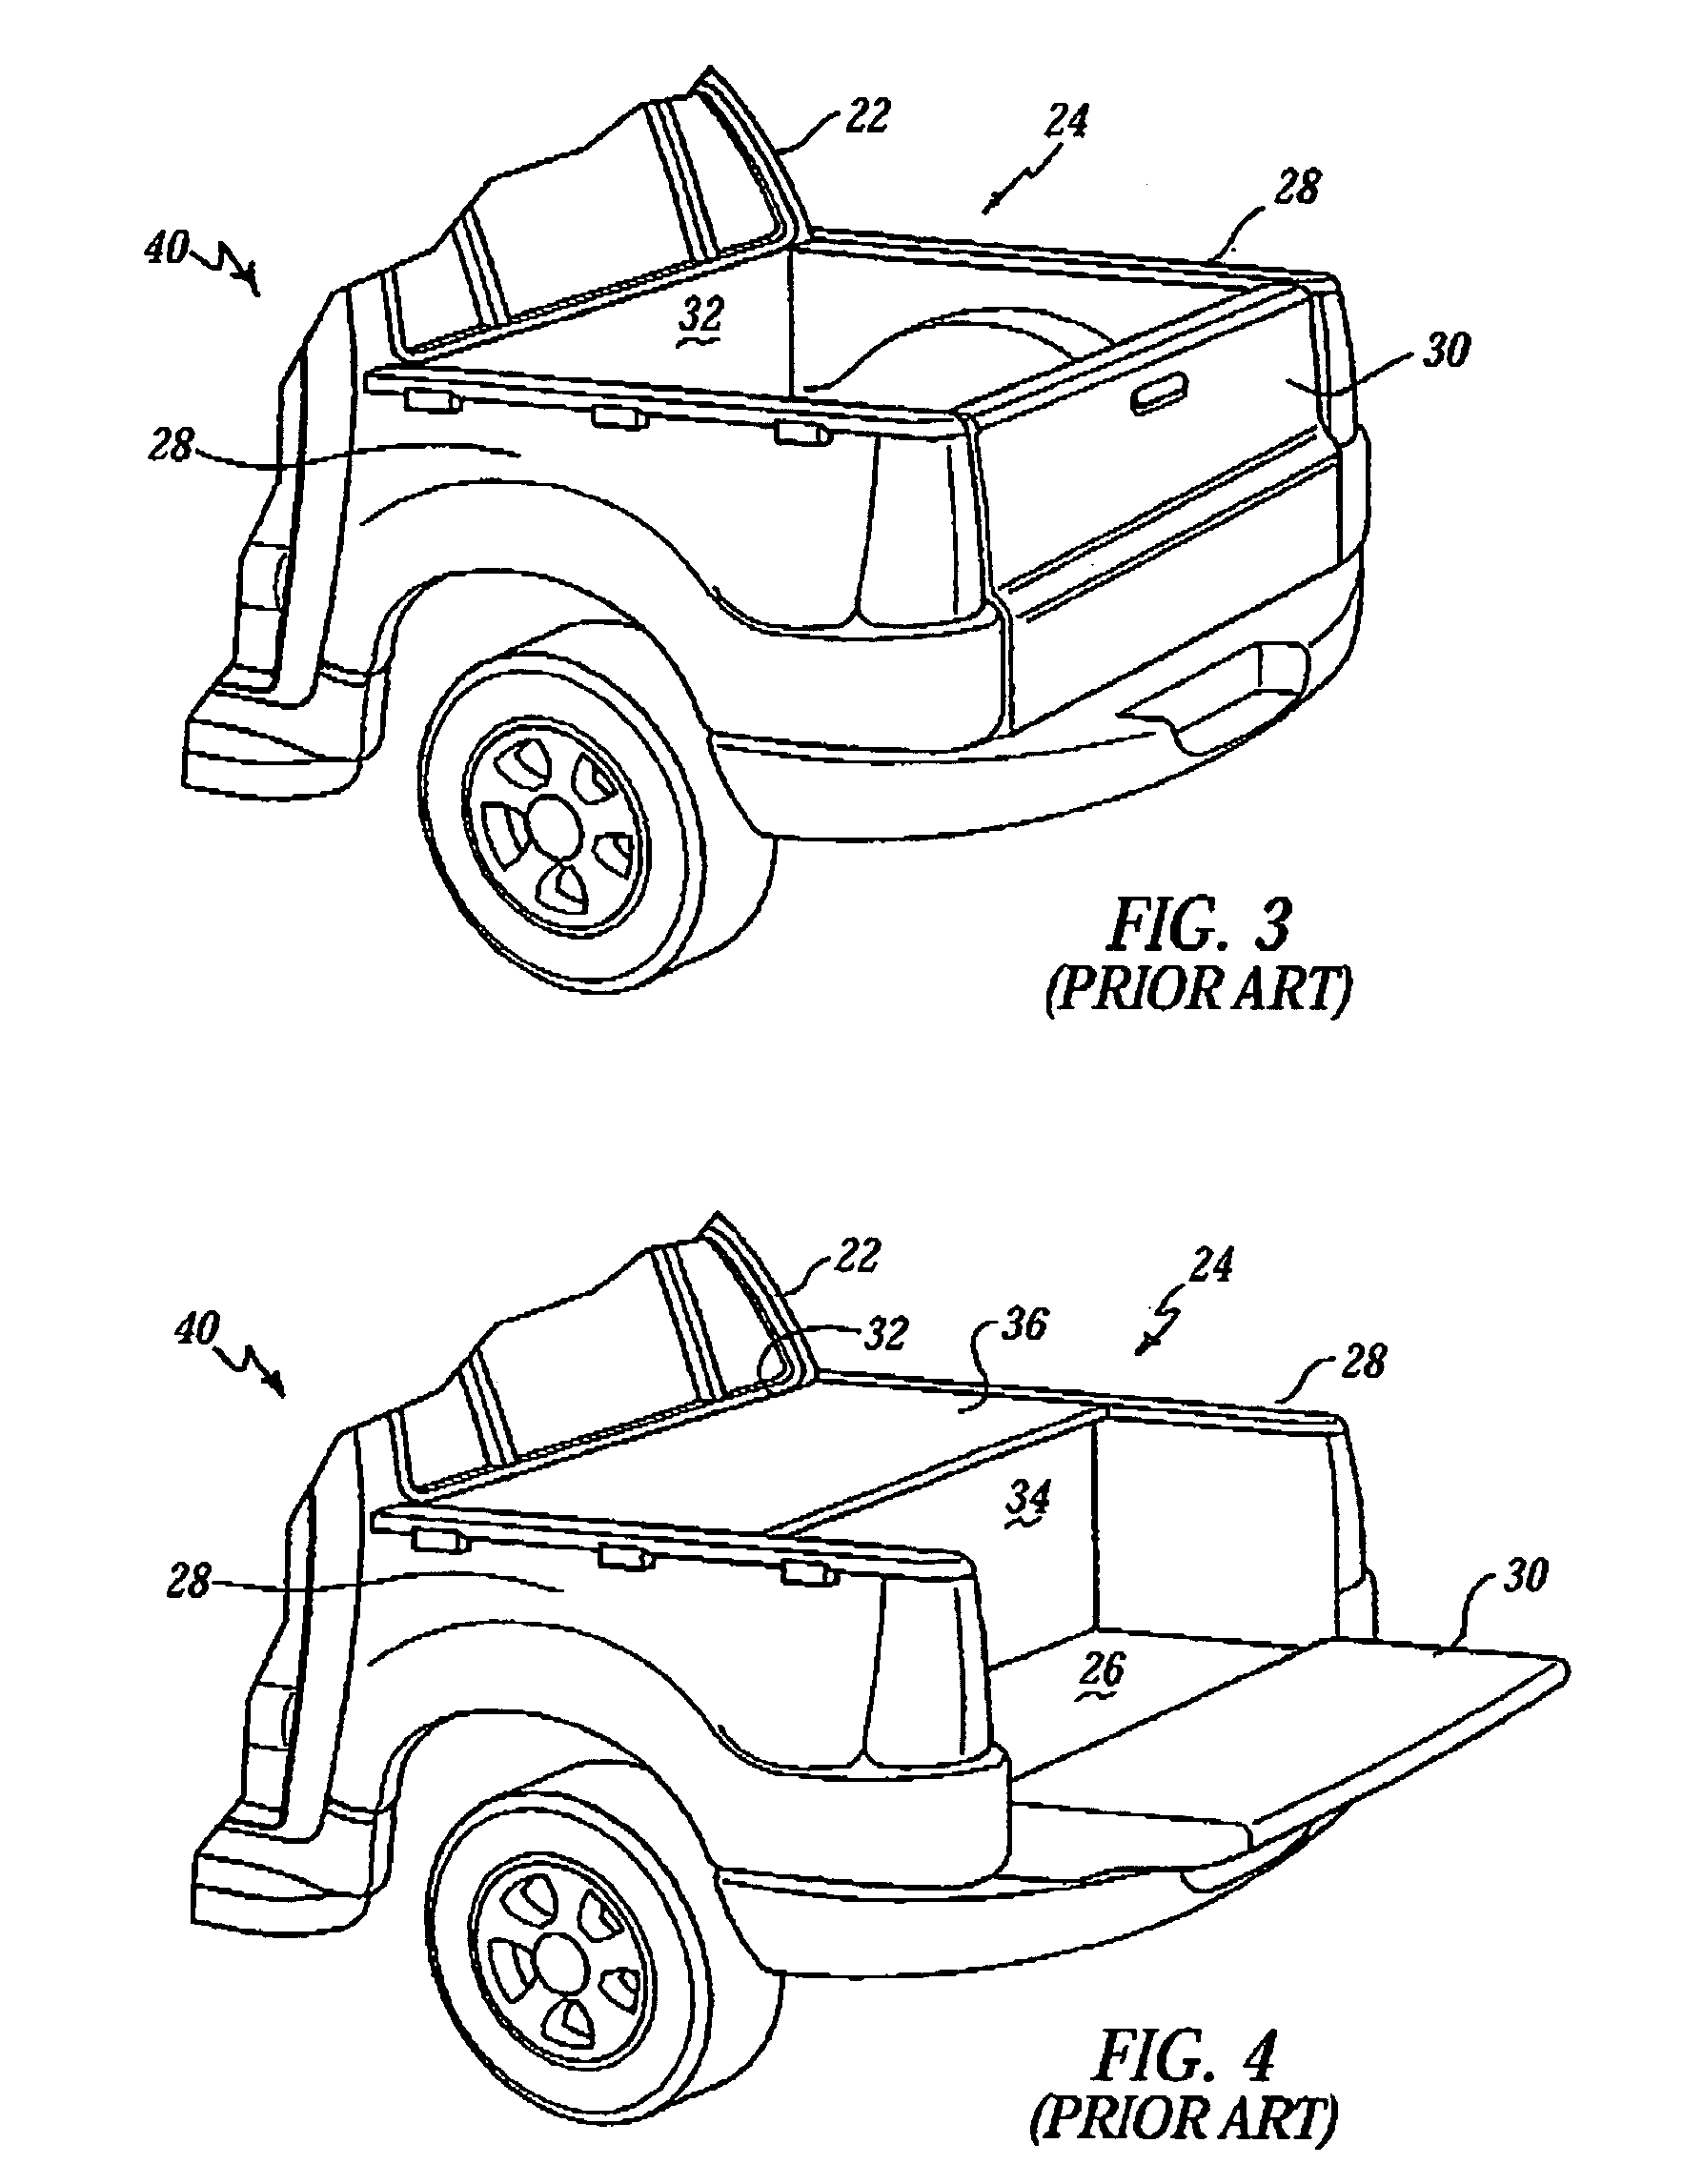 Vehicle cargo bed extender having a pin lock assembly